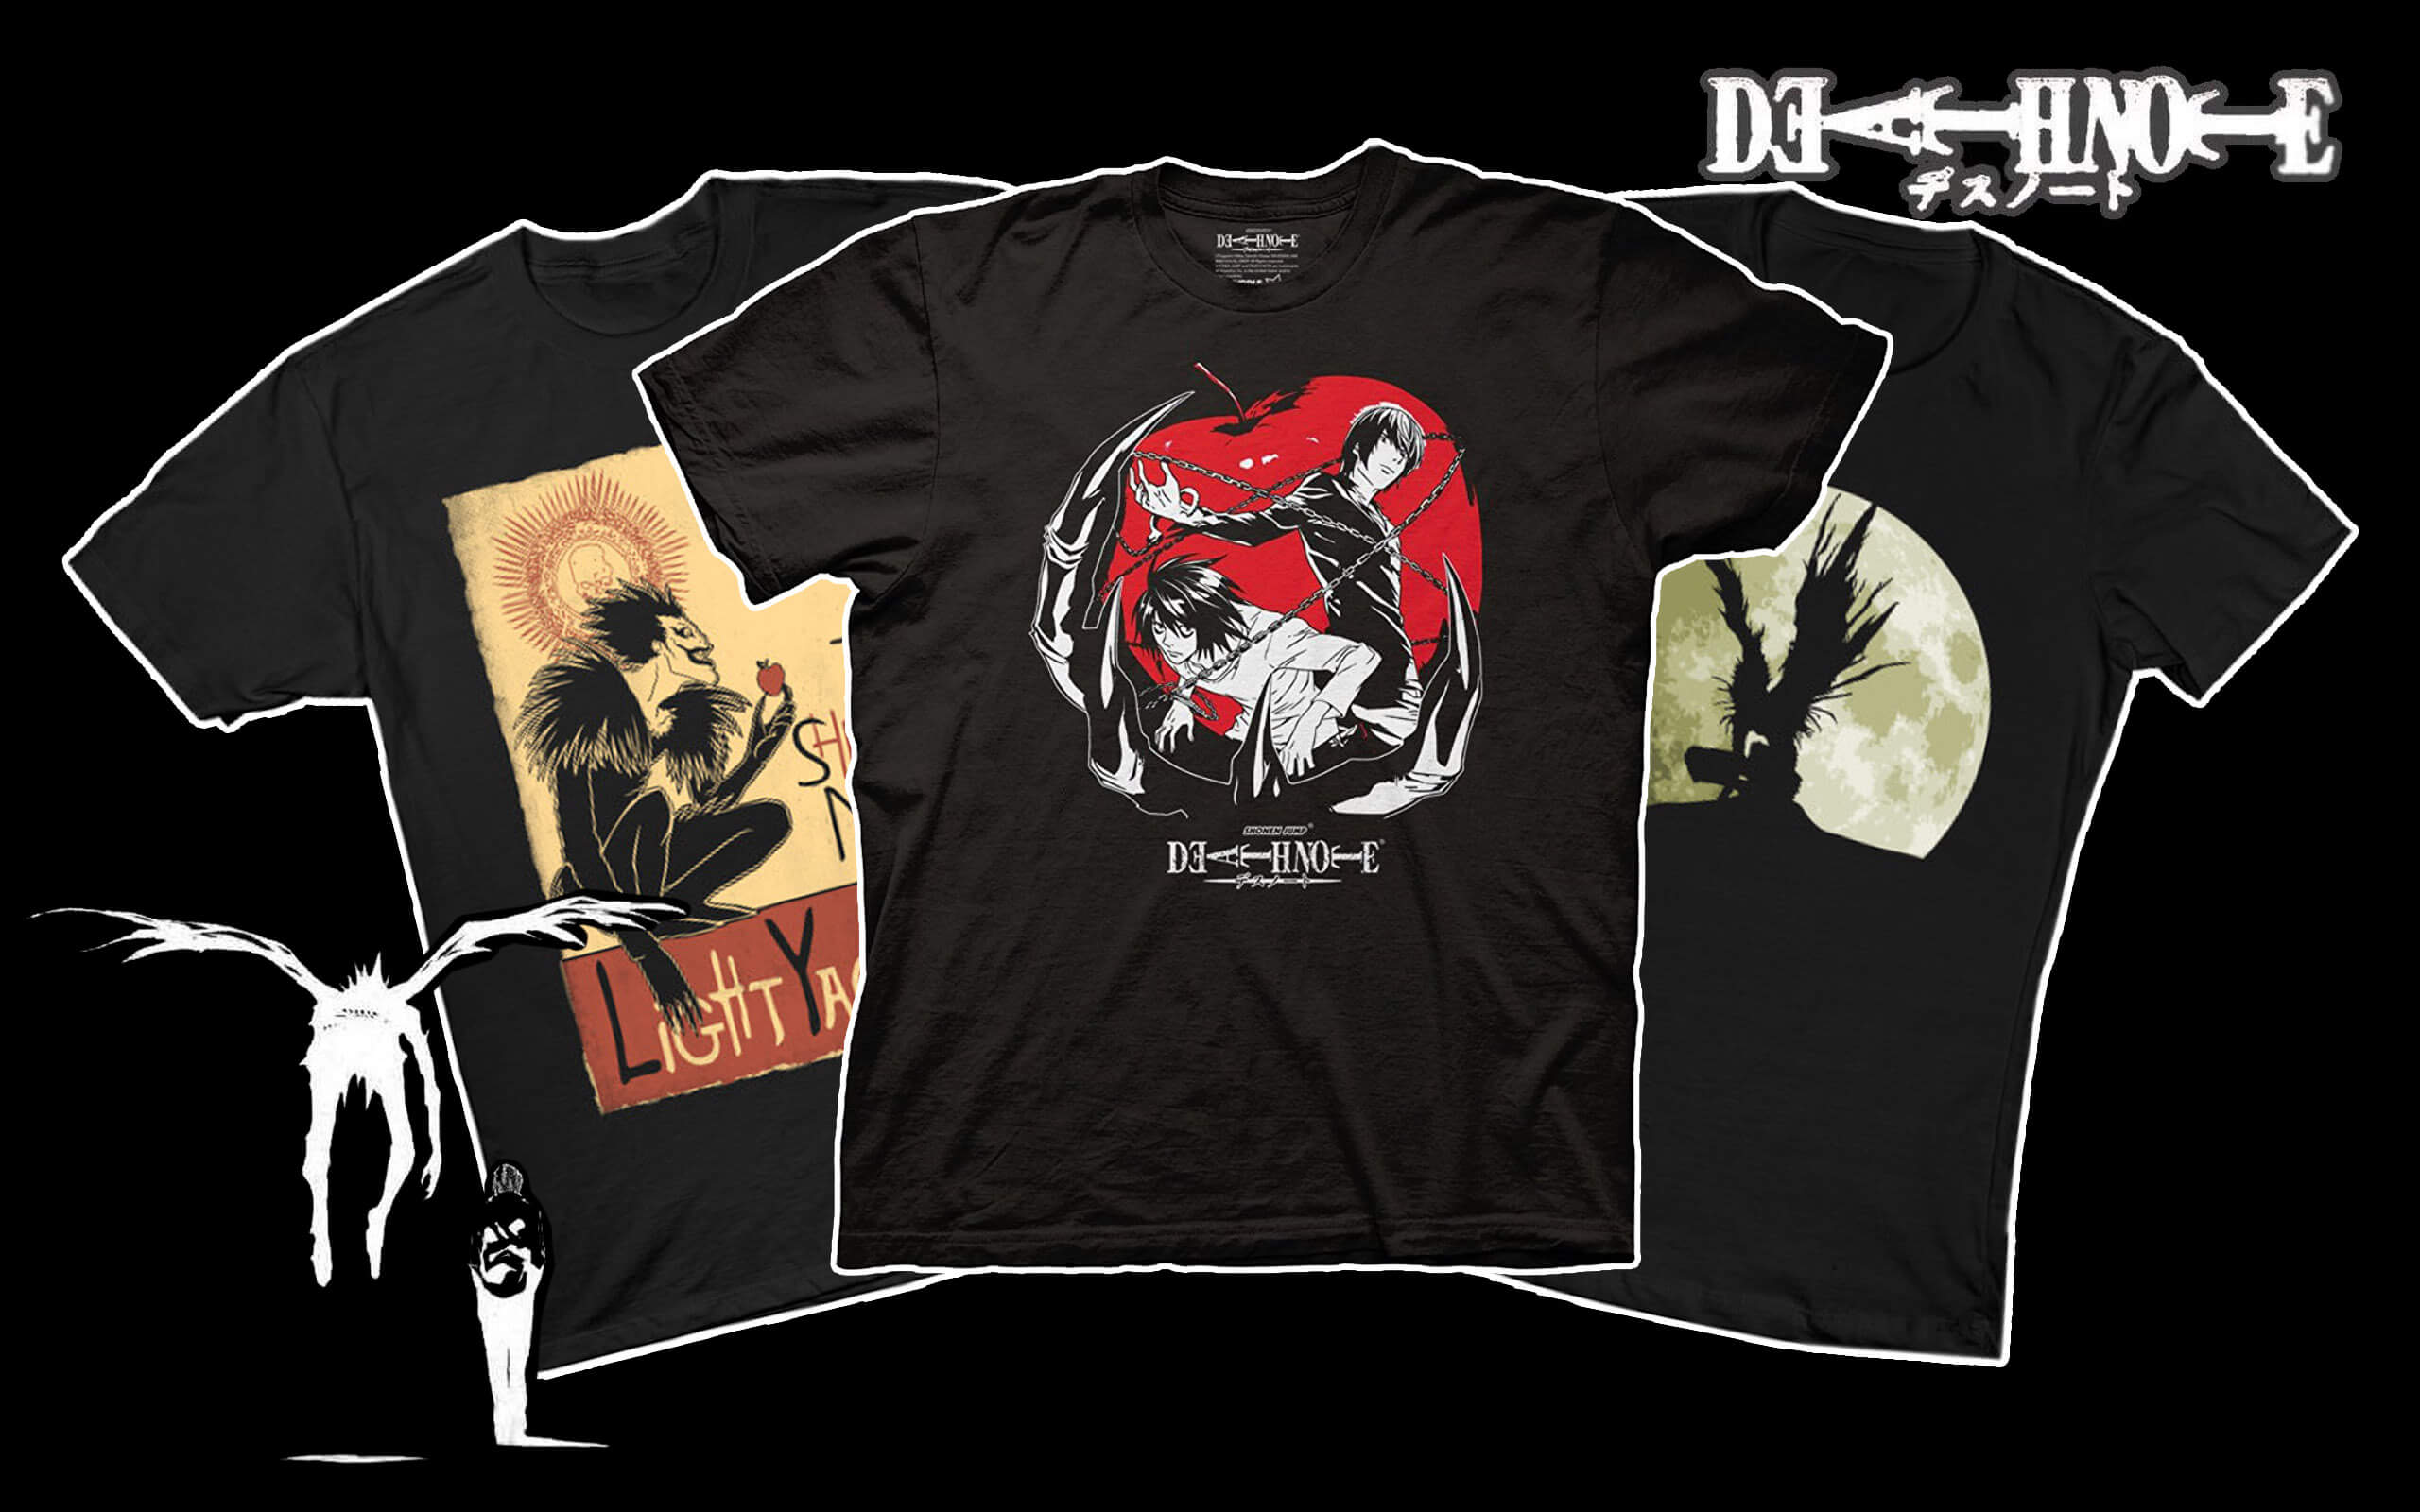 10 Death Note Shirts to Ward off Shinigami - DiscoverGeek | Search ...